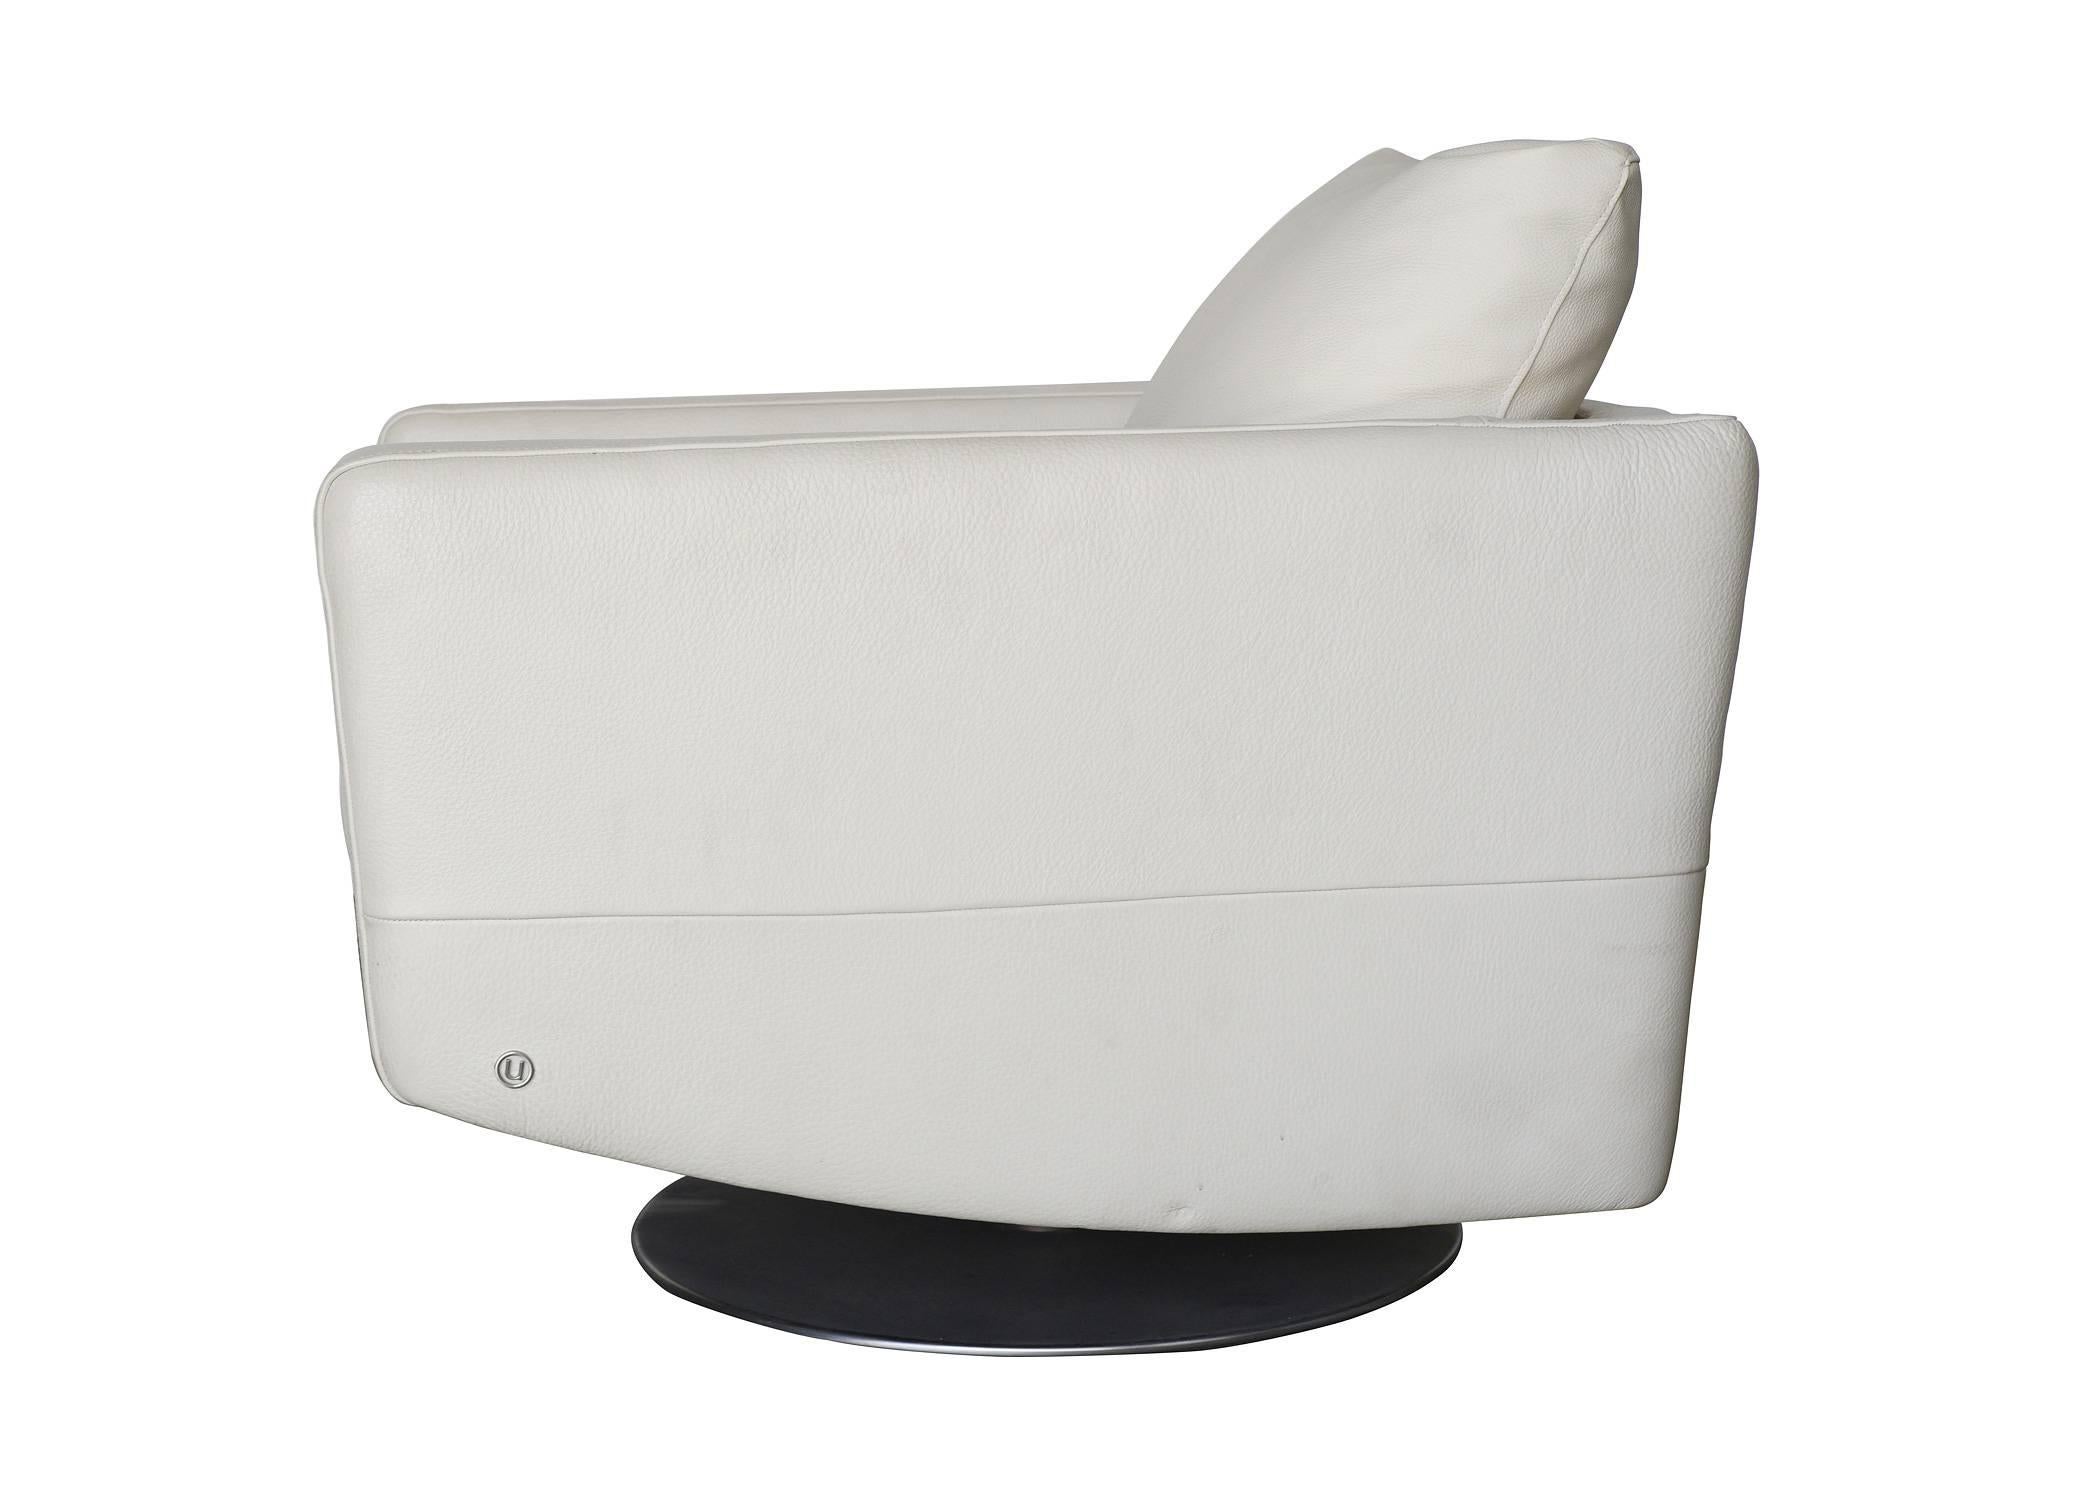 Modernist White Swivel Lounge Chair with Brush Steel Base In Excellent Condition For Sale In Van Nuys, CA